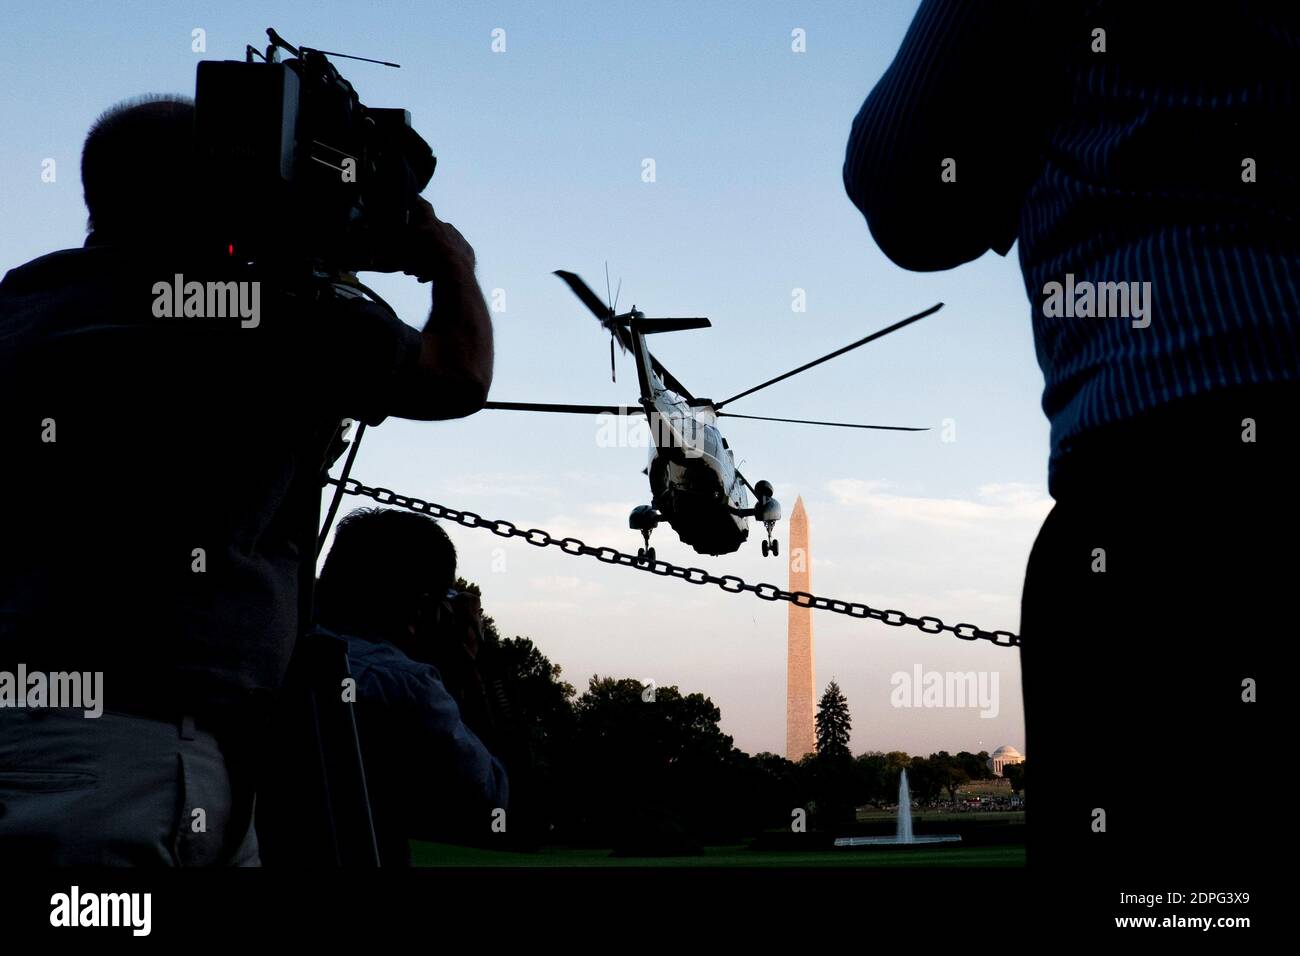 President Barack Obama leaves aboard Marine One from the South Lawn of the White House on July 23, 2015 in Washington, DC, USA, as he departs for a trip to Ethiopia and Kenya, homeland of his father. Obama arrives in Kenya Friday, where he will attend the Global Entrepreneurship Summit in Nairobi. He will become the first American president to visit Ethiopia. Photo by Pete Marovich/Pool/ABACAPRESS.COM Stock Photo